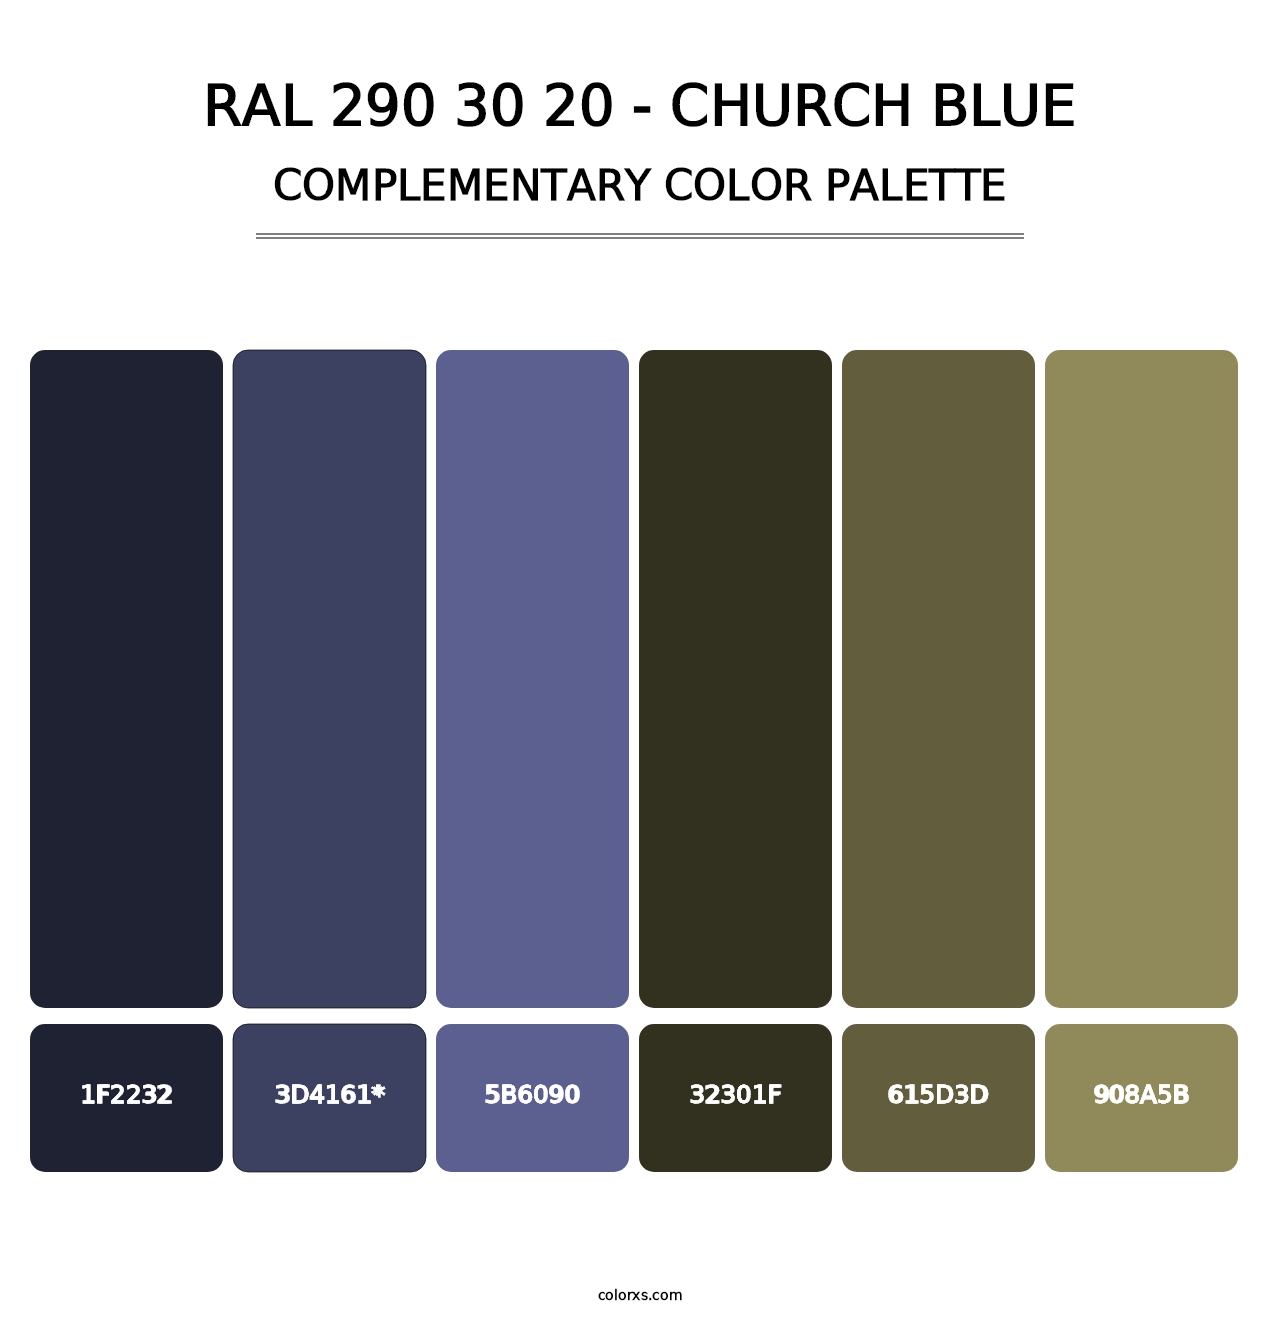 RAL 290 30 20 - Church Blue - Complementary Color Palette